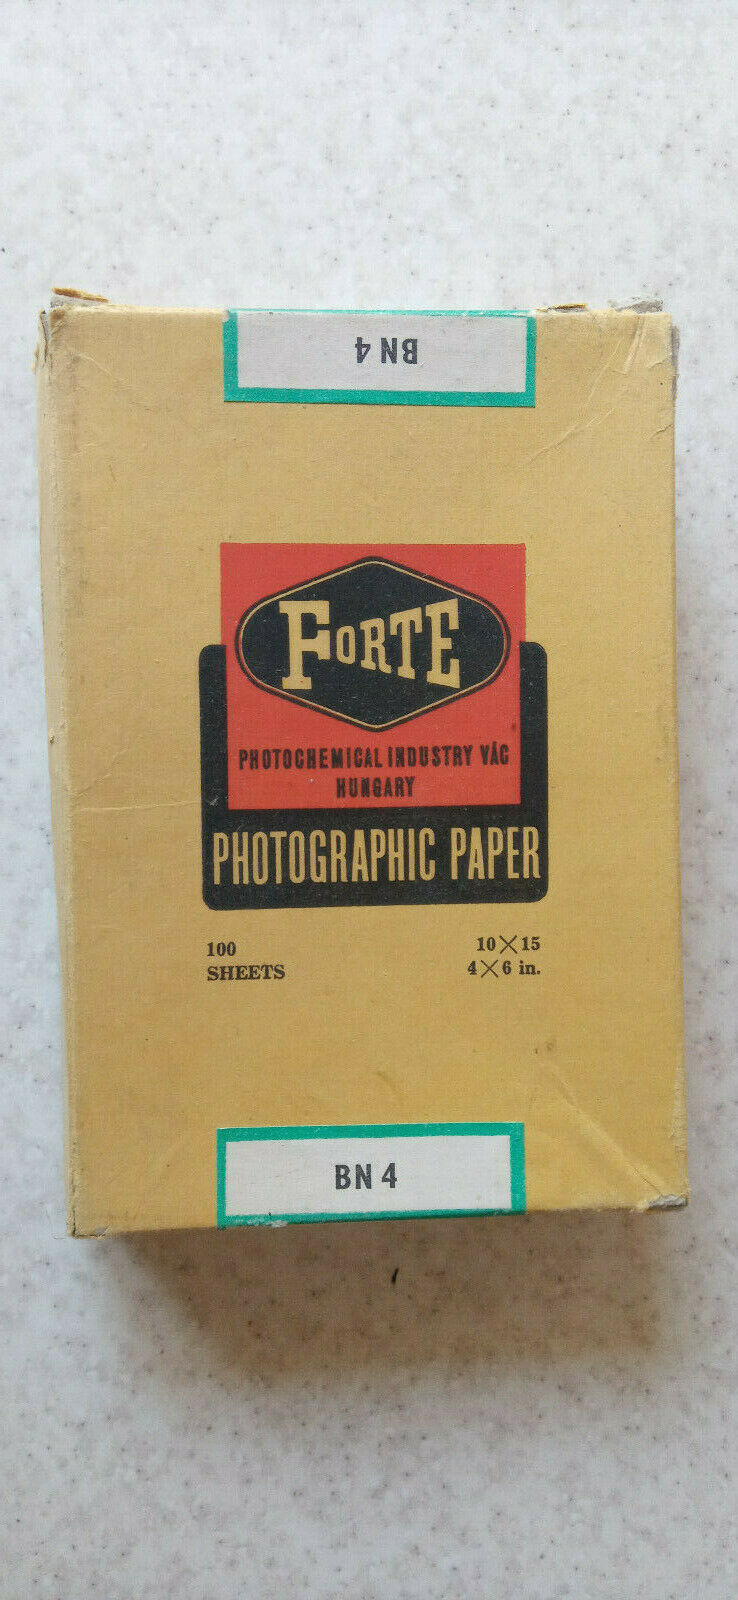 Vintage Hungarian B&w Glossy Photo Paper Forte Bromofort Bn4 100pc 10x15cm